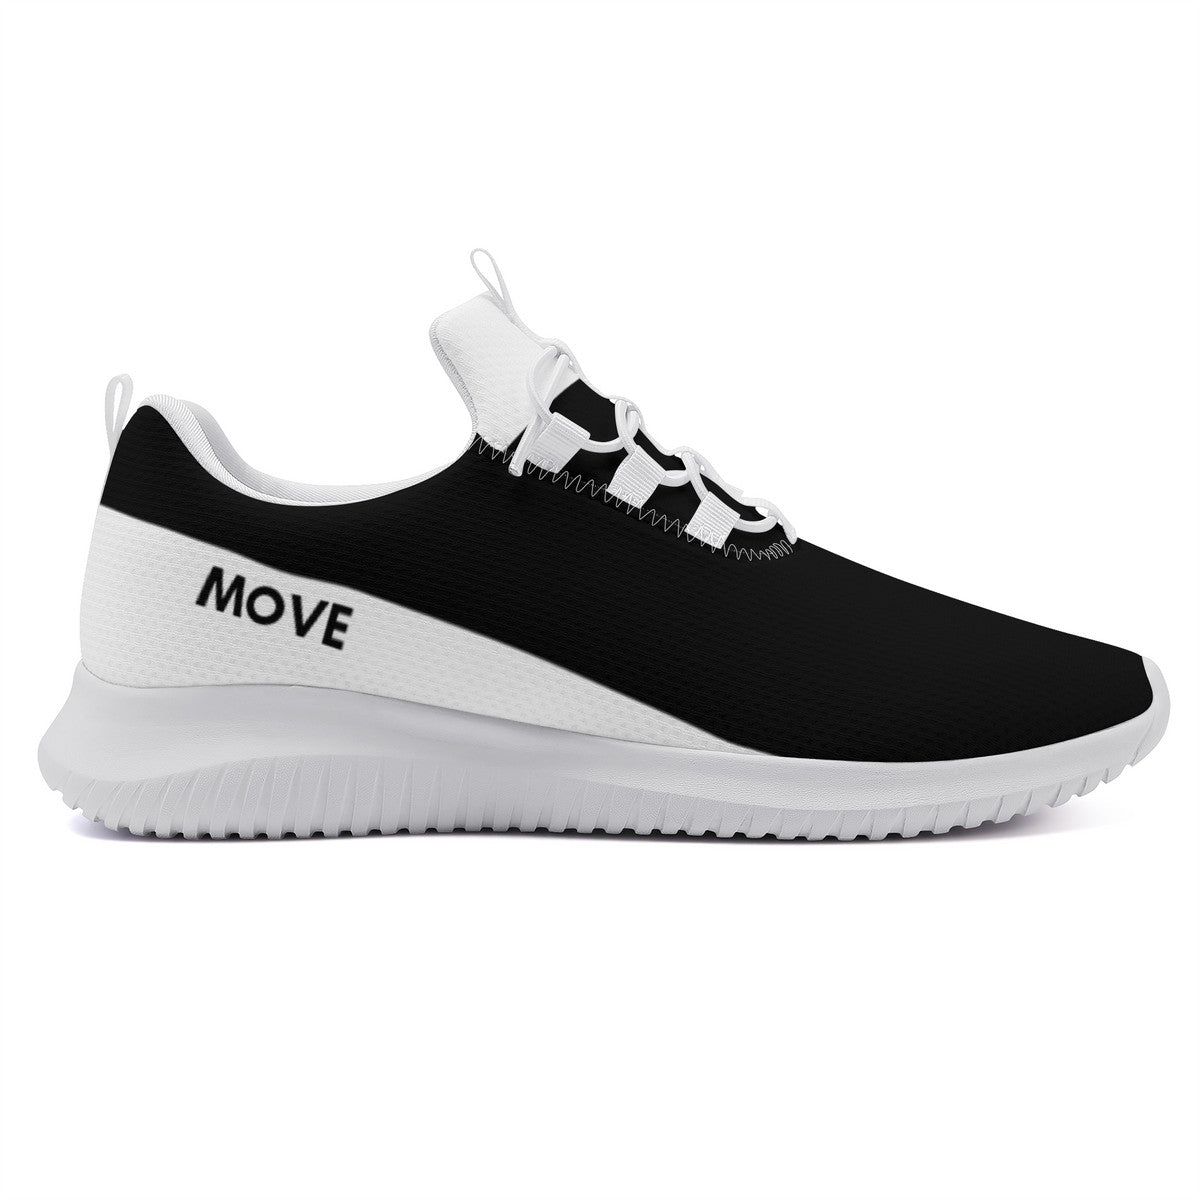 Fitness Sneakers - Move - Black